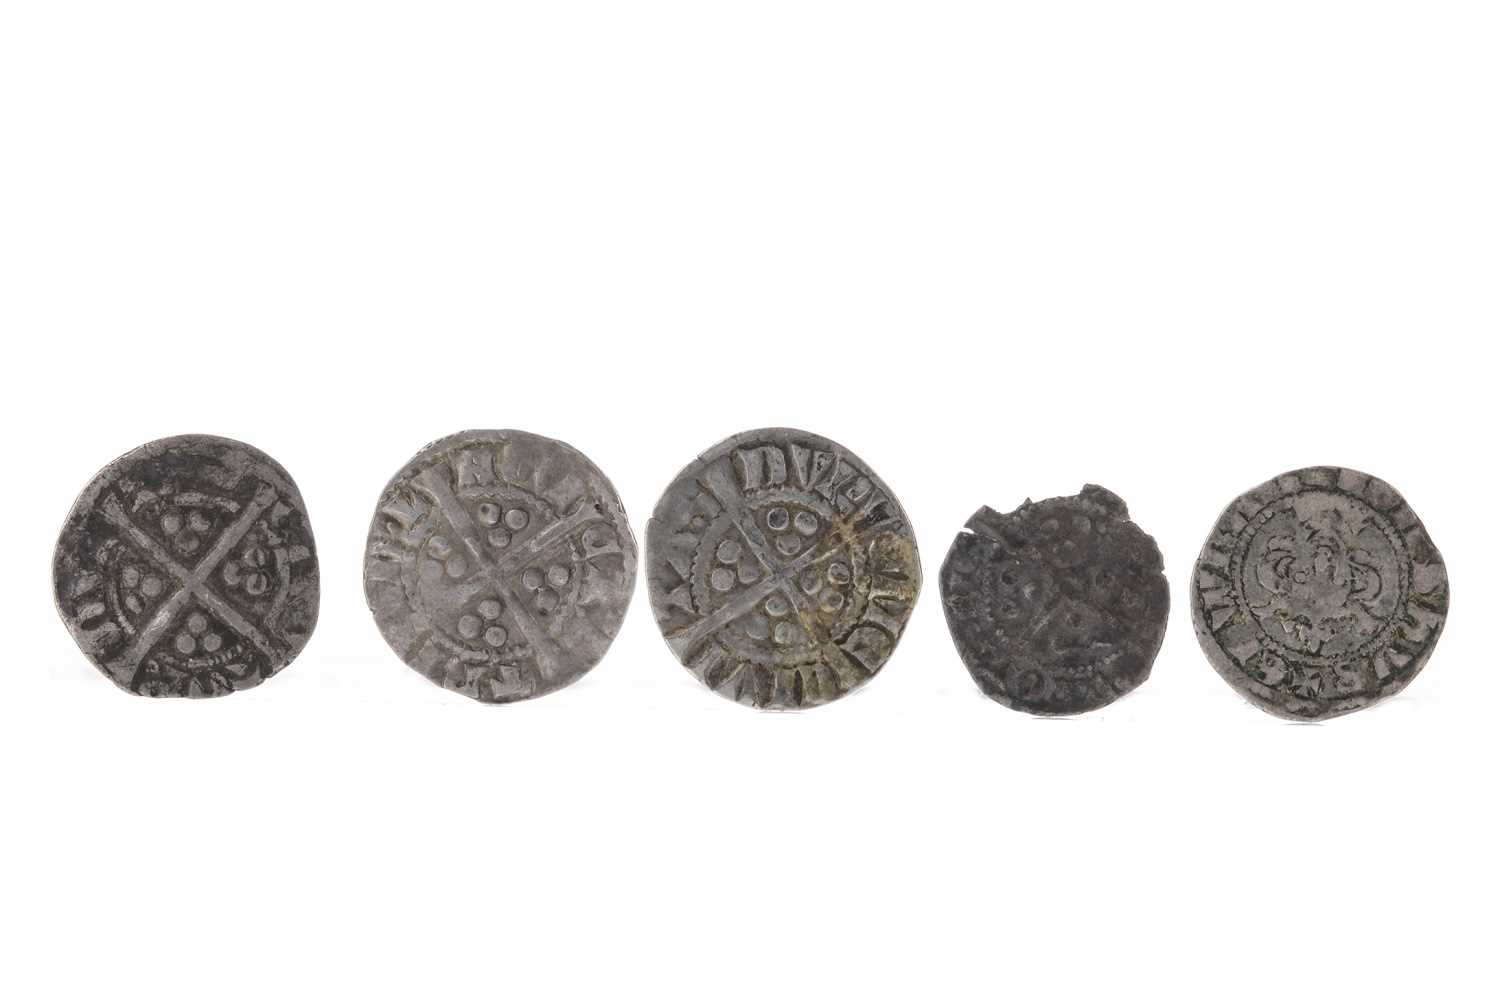 Lot 120 - A COLLECTION OF EDWARD I (1272 - 1307) PENNIES